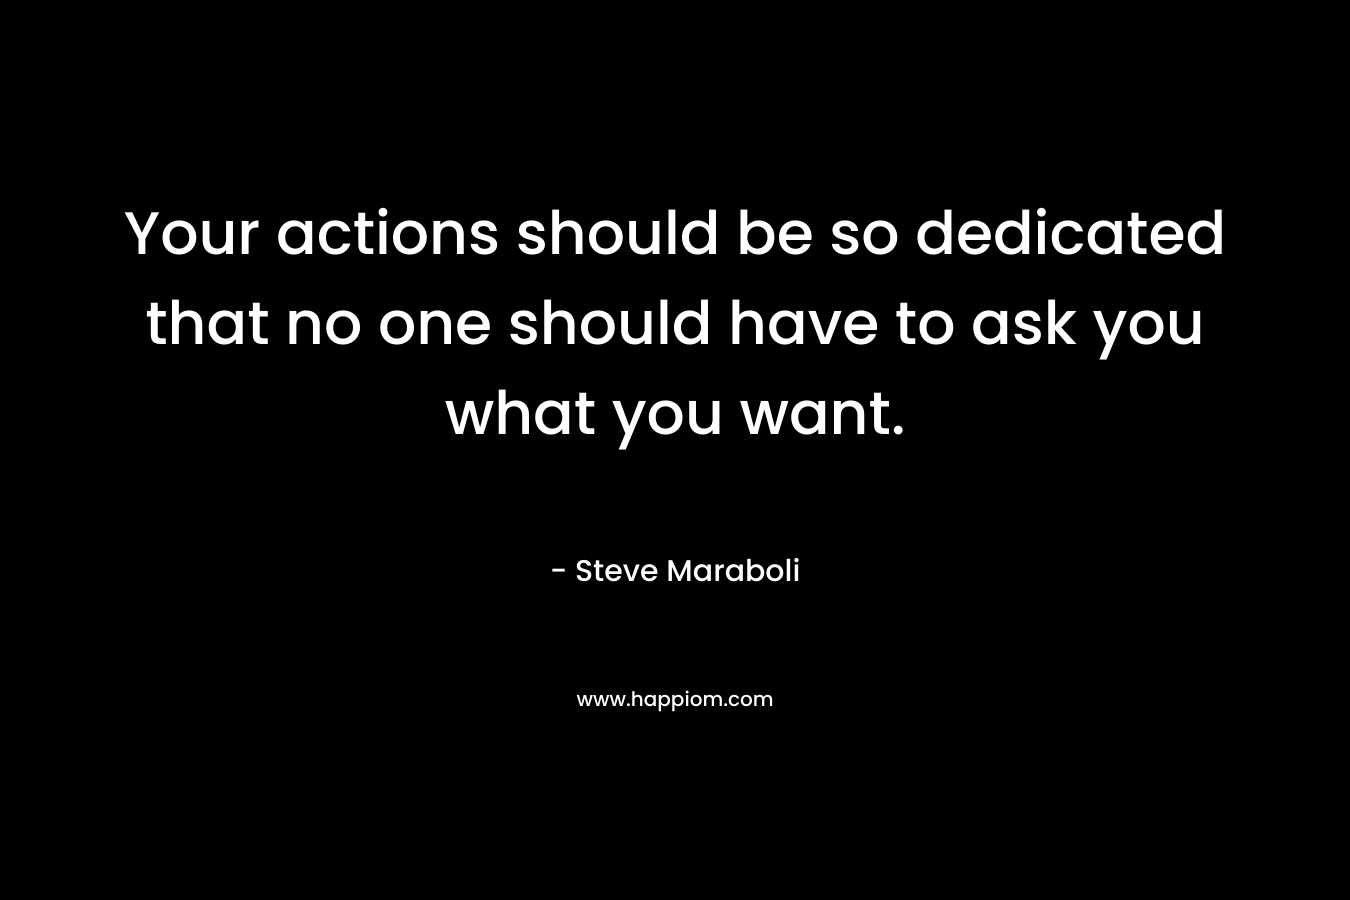 Your actions should be so dedicated that no one should have to ask you what you want. – Steve Maraboli